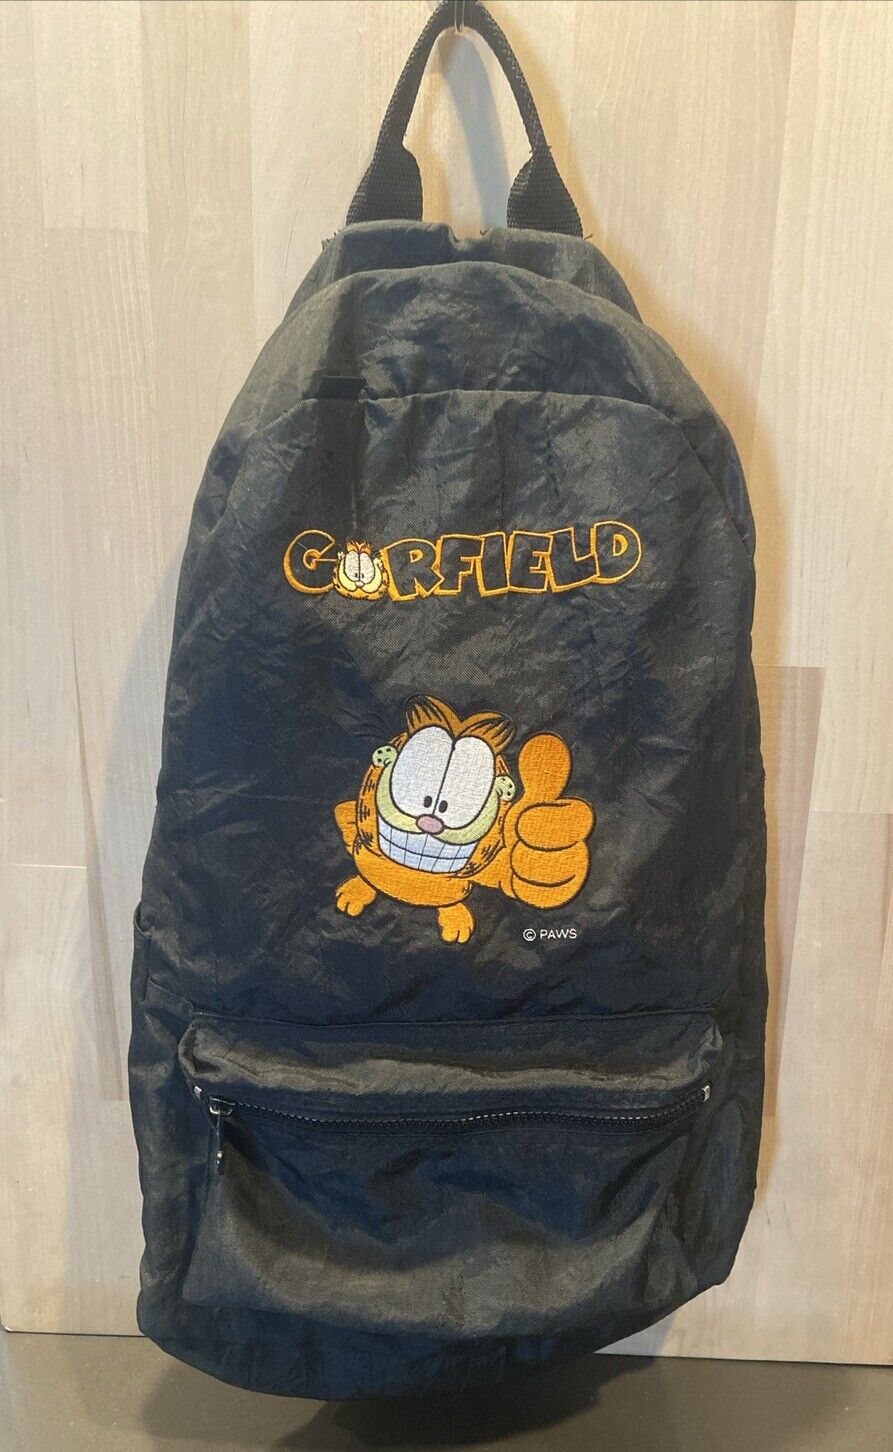 1996 Vintage Garfield Paws Backpack by Mead.  *READ